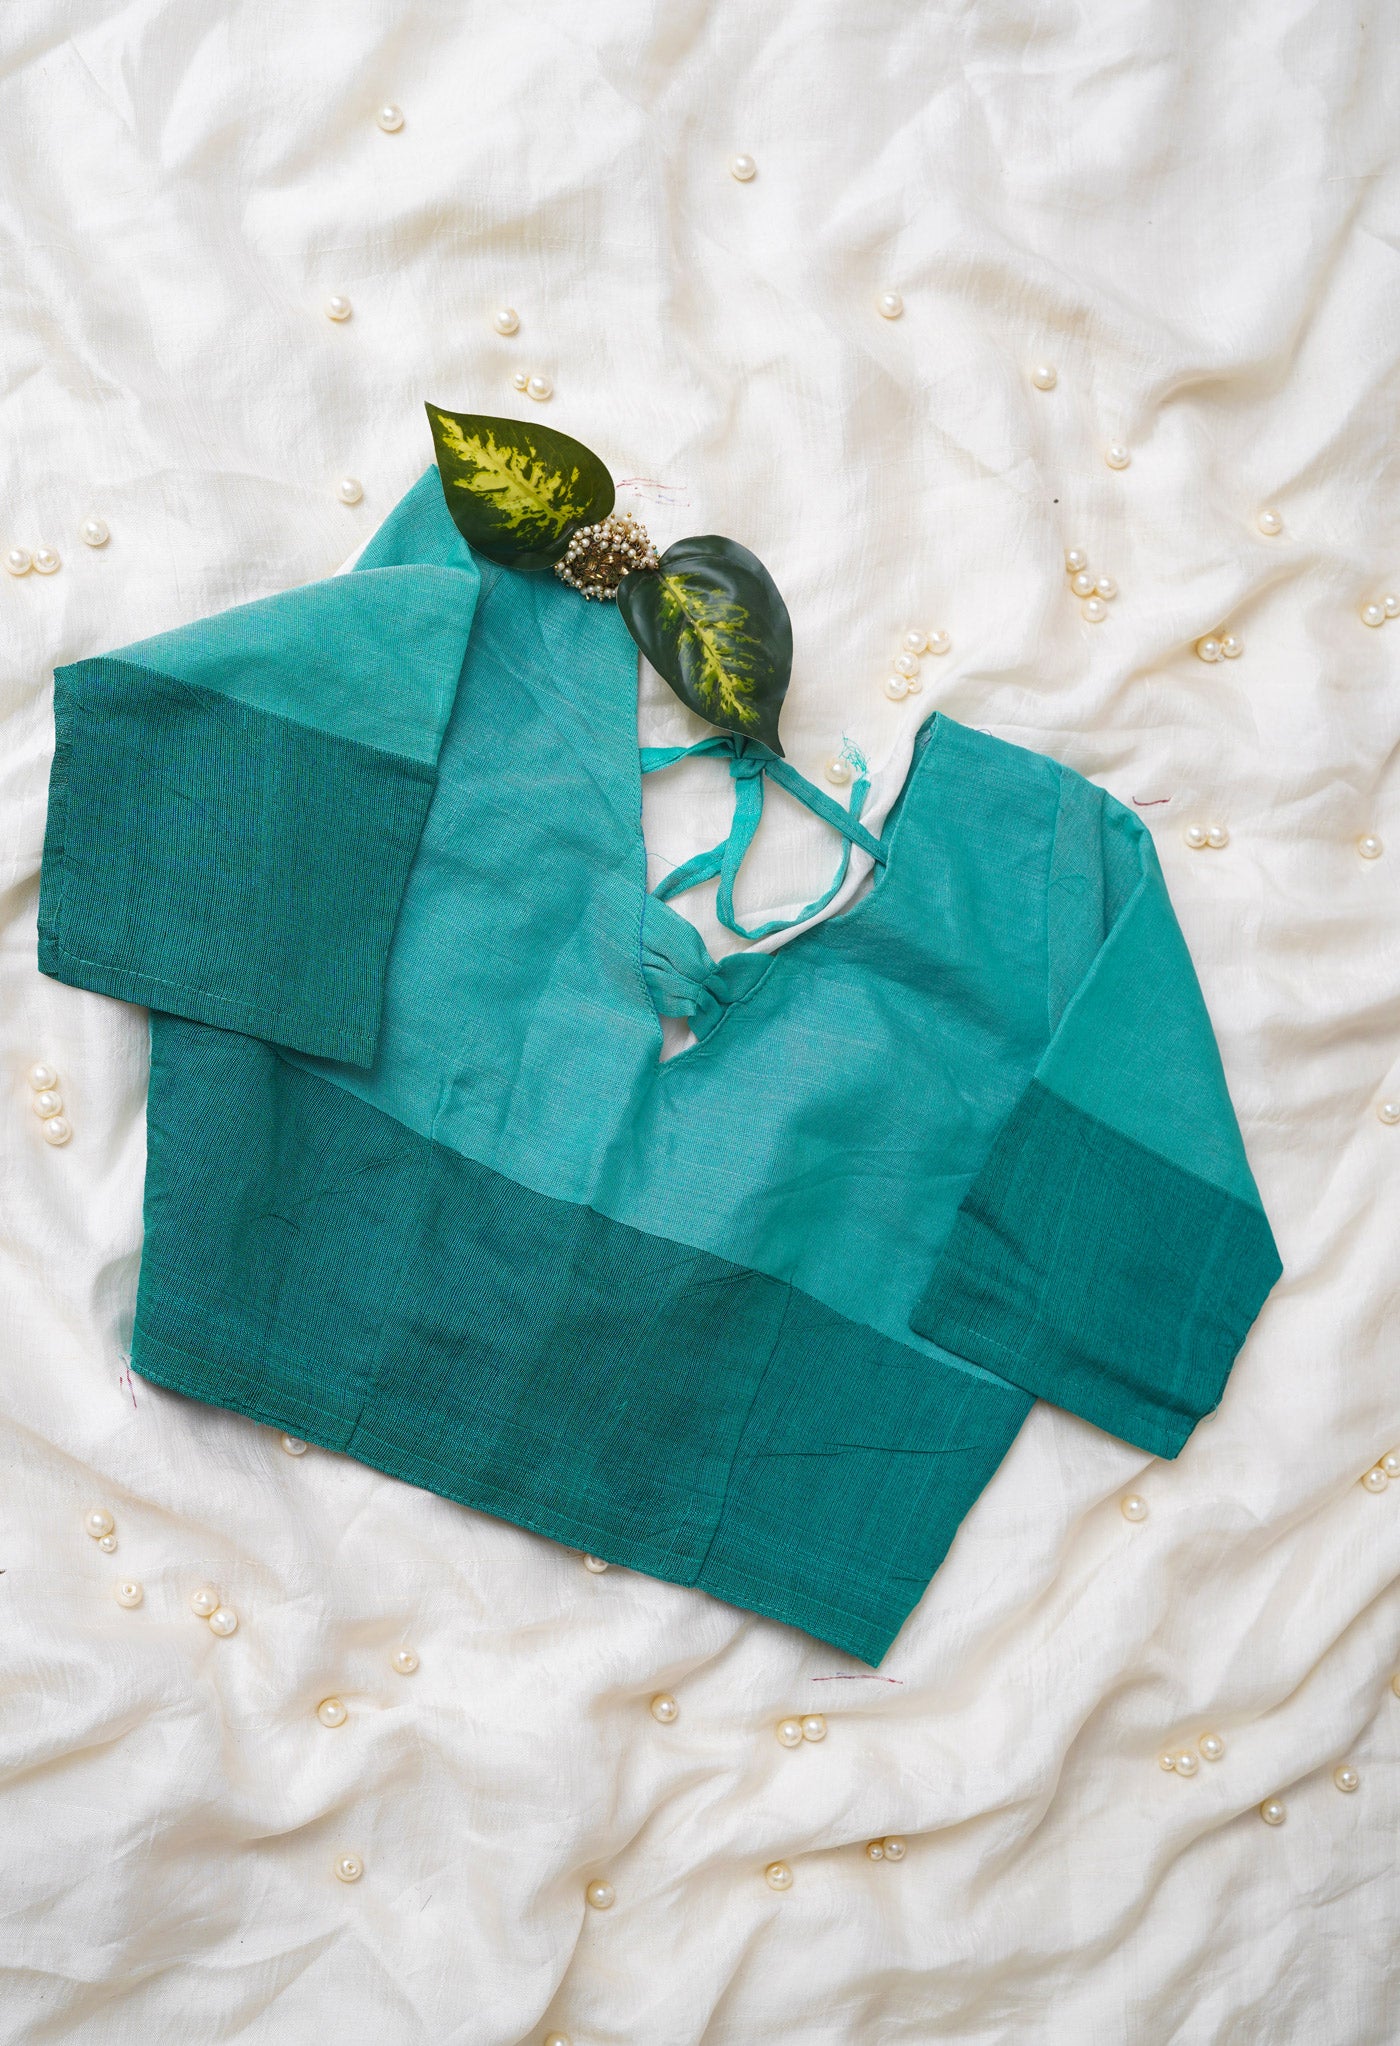 Teal Green Pure Bengal Ghicha Tussar Jute Readymade Blouse (32 Size +1inch Margin)–PKB423